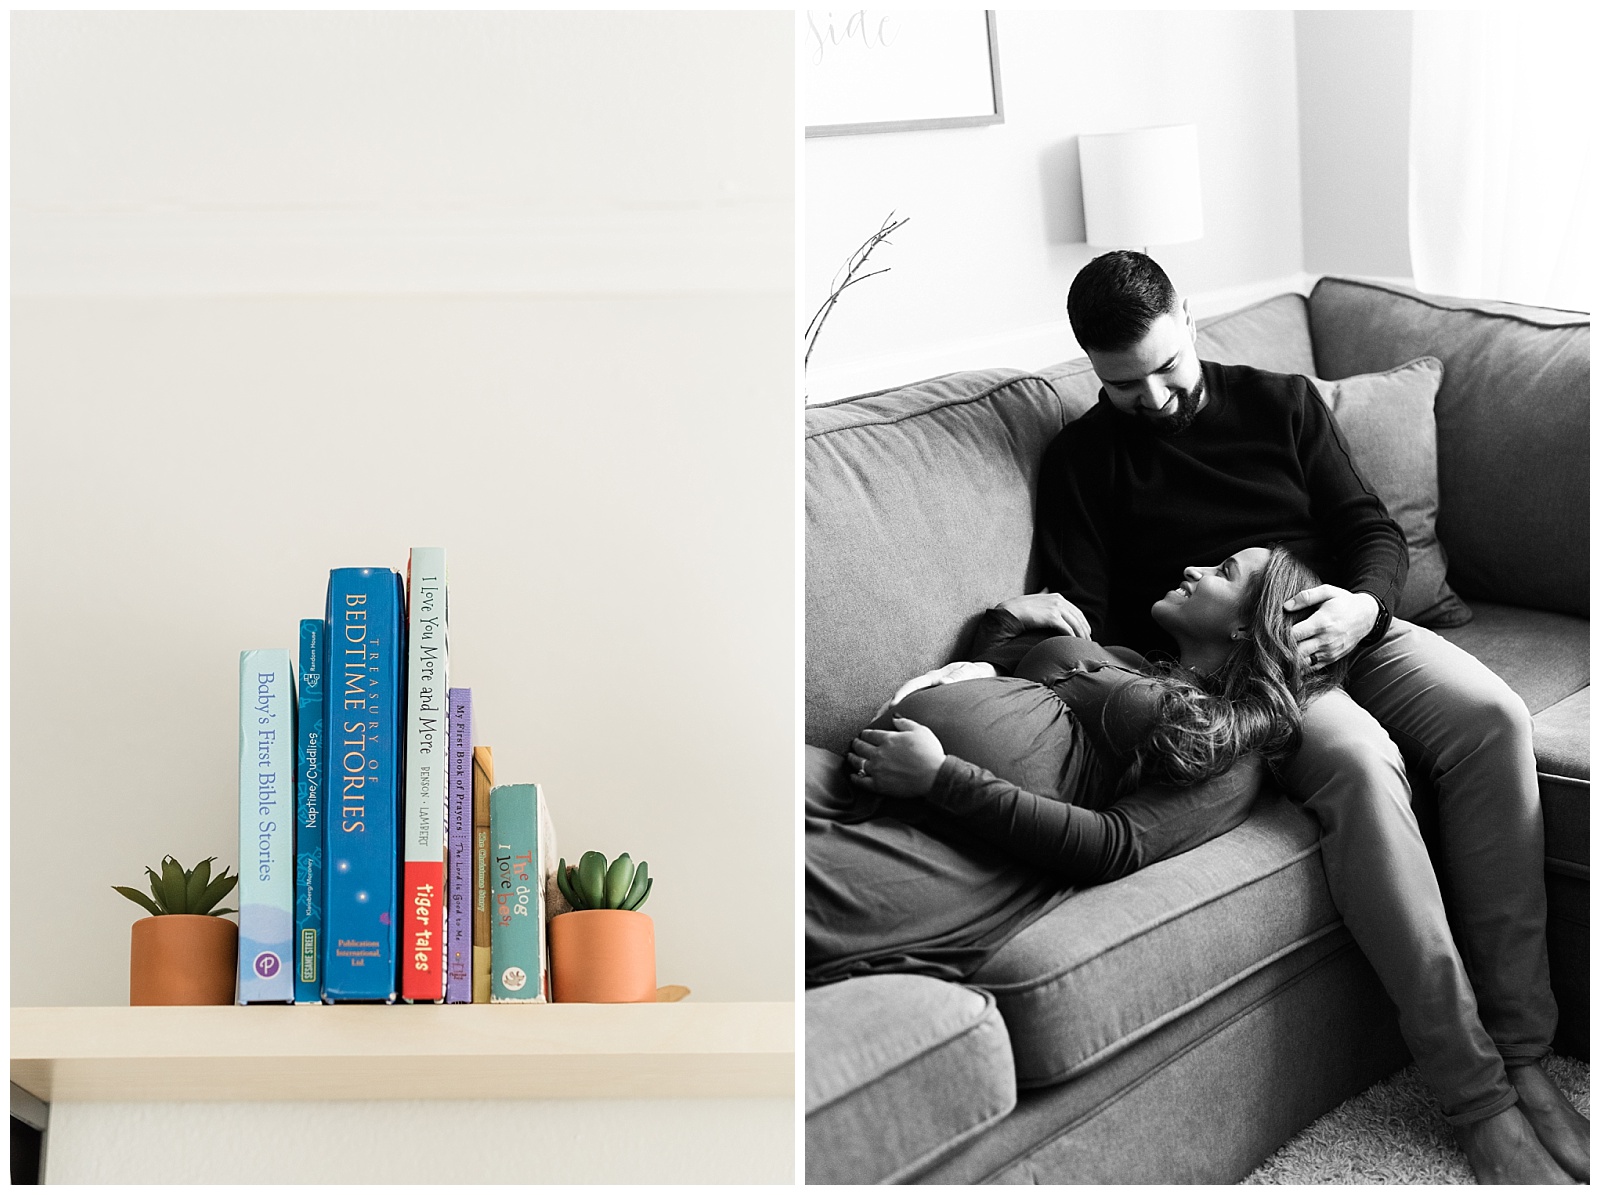 In Home Maternity Session, Nursery, Baby, New Parents, Maternity Shoot, Pregnant, Pregnancy Photos, New Jersey, Photographer, Baby Boy, Baby books, couch, Nursery, Photo